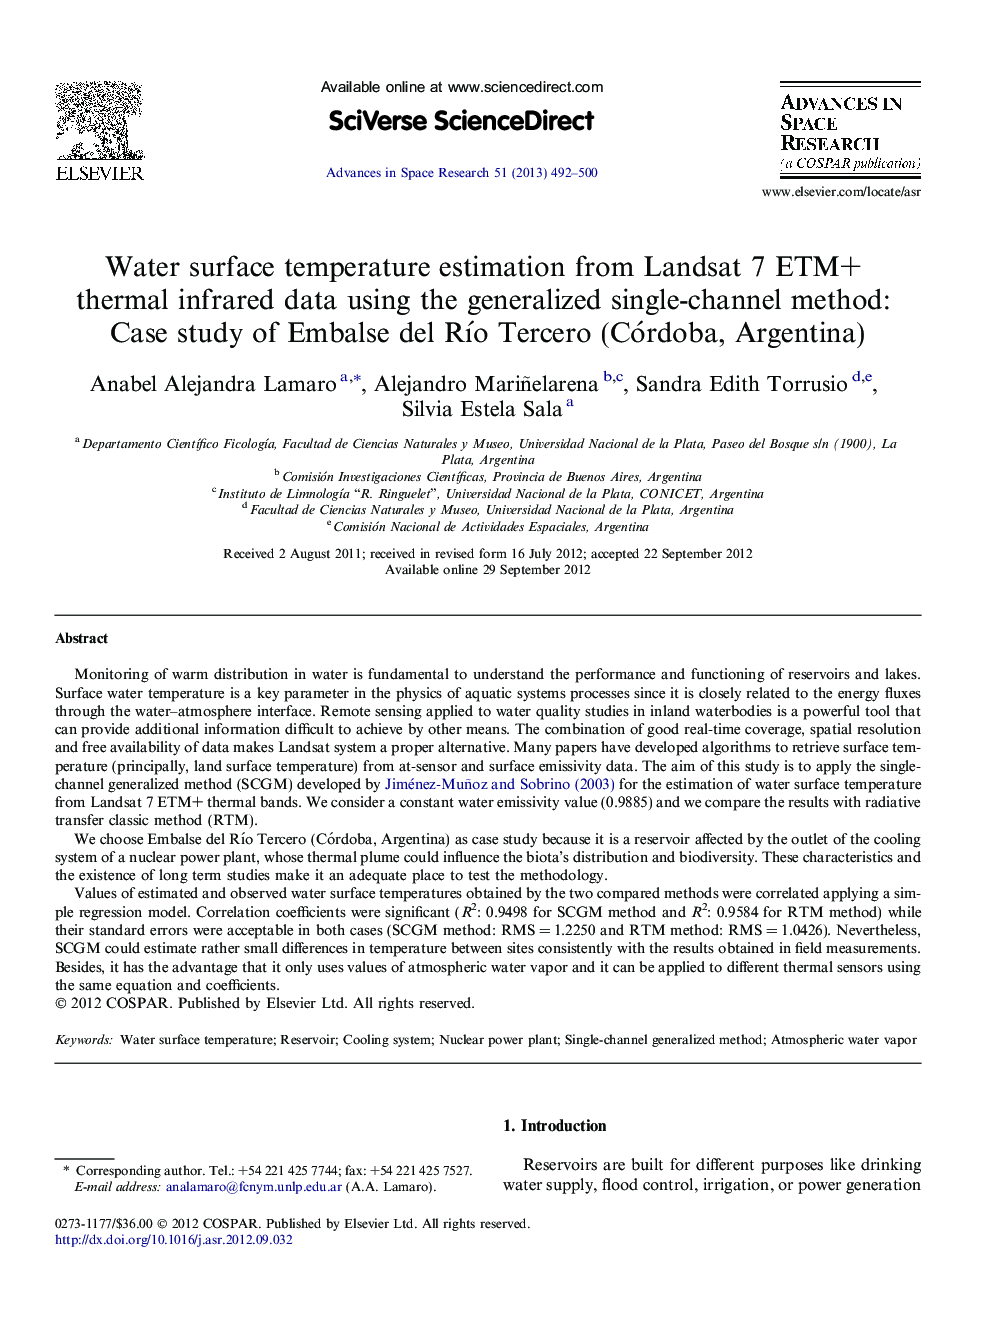 Water surface temperature estimation from Landsat 7 ETM+ thermal infrared data using the generalized single-channel method: Case study of Embalse del Río Tercero (Córdoba, Argentina)